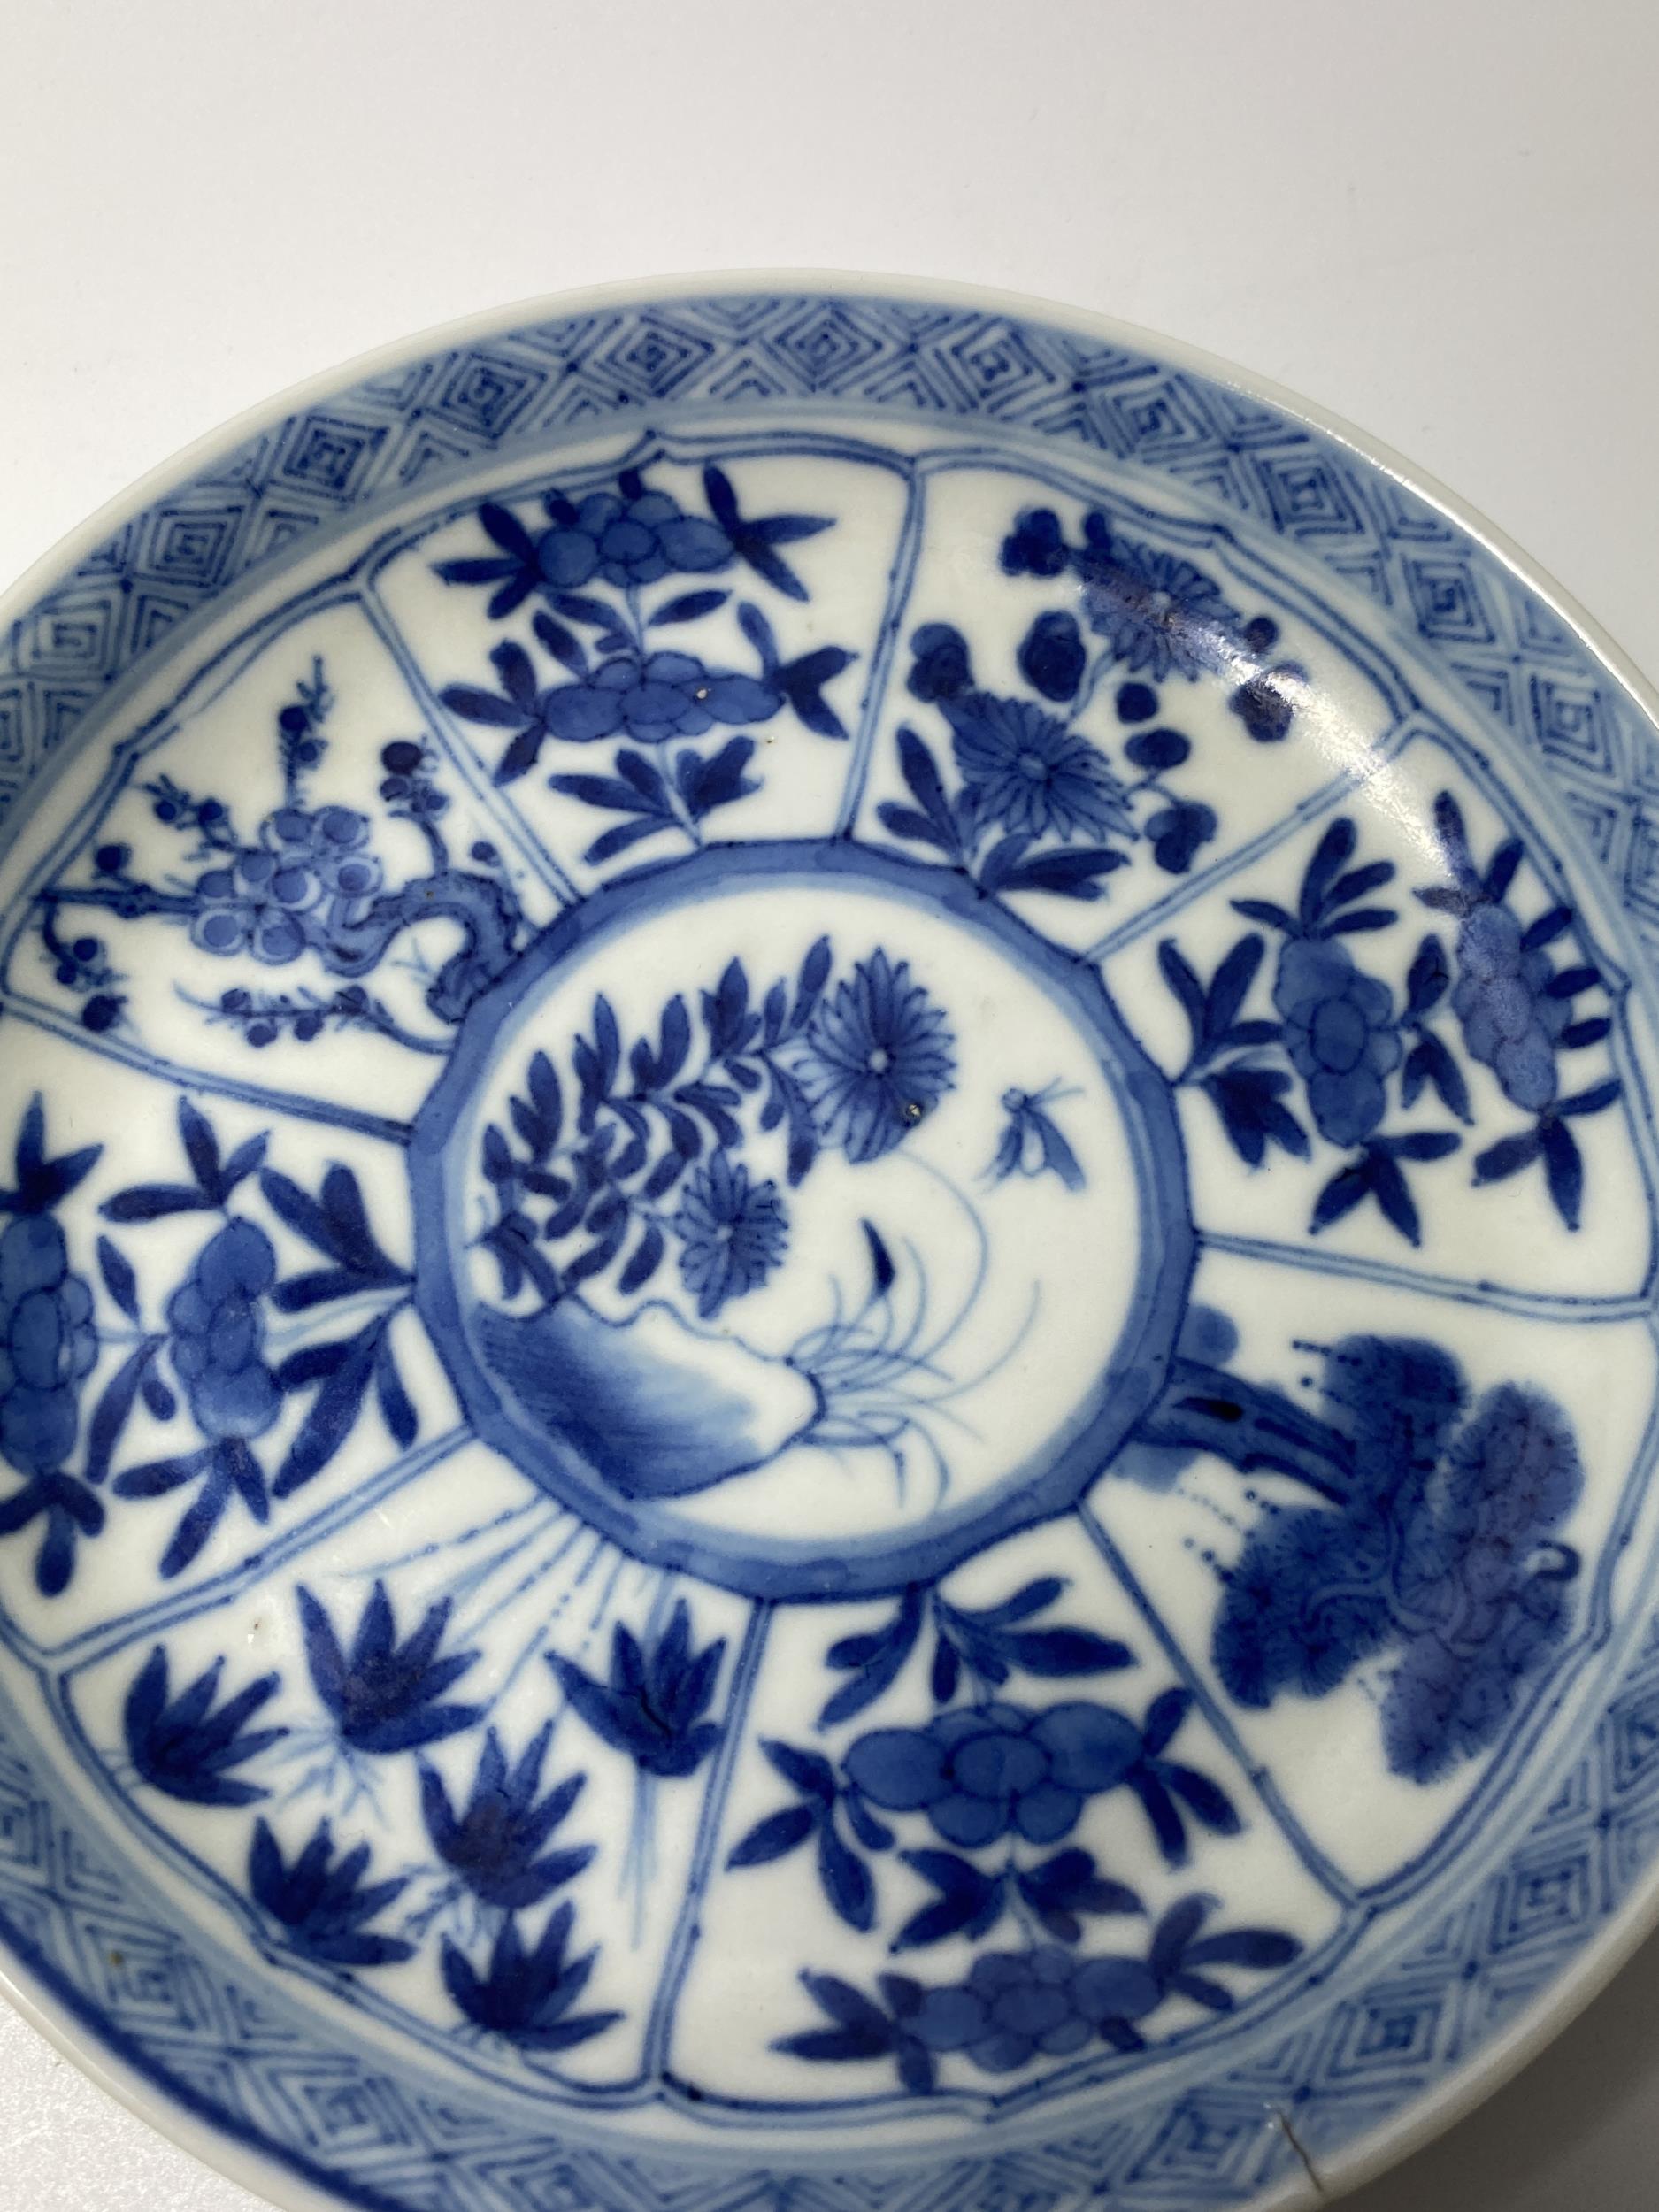 A PAIR OF KANGXI PERIOD (1661-1722) CHINESE BLUE AND WHITE PORCELAIN PLATES, ARTEMESIA LEAF MARK - Image 5 of 13